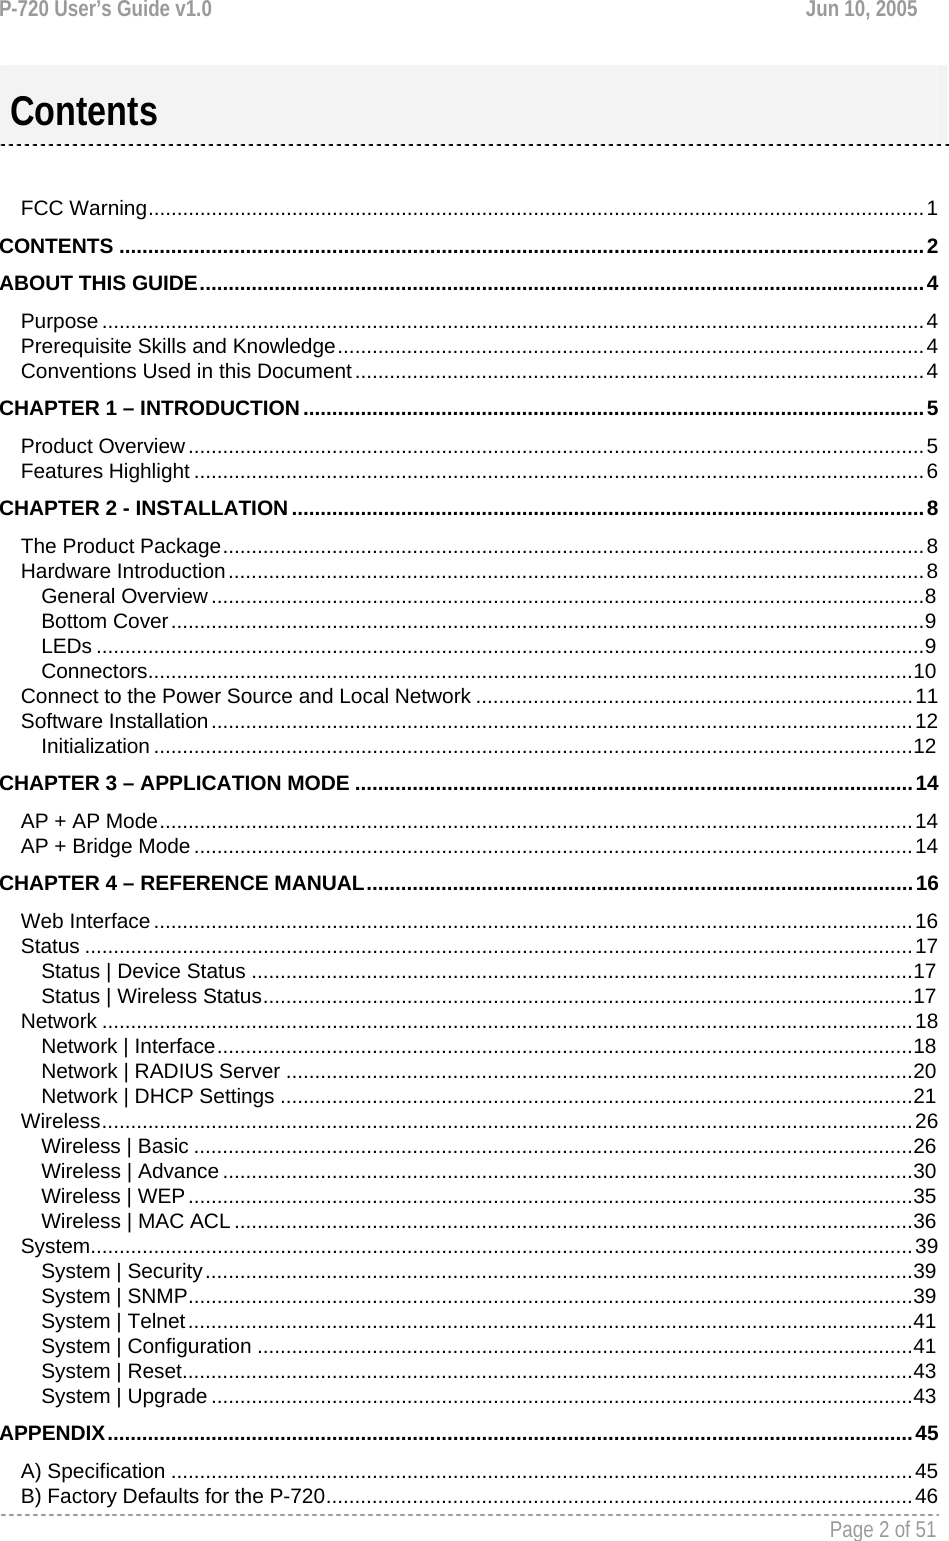 P-720 User’s Guide v1.0  Jun 10, 2005     Page 2 of 51    FCC Warning.......................................................................................................................................1 CONTENTS ............................................................................................................................................2 ABOUT THIS GUIDE..............................................................................................................................4 Purpose ...............................................................................................................................................4 Prerequisite Skills and Knowledge......................................................................................................4 Conventions Used in this Document...................................................................................................4 CHAPTER 1 – INTRODUCTION............................................................................................................5 Product Overview................................................................................................................................5 Features Highlight ...............................................................................................................................6 CHAPTER 2 - INSTALLATION..............................................................................................................8 The Product Package..........................................................................................................................8 Hardware Introduction.........................................................................................................................8 General Overview ............................................................................................................................8 Bottom Cover...................................................................................................................................9 LEDs ................................................................................................................................................9 Connectors.....................................................................................................................................10 Connect to the Power Source and Local Network ............................................................................11 Software Installation..........................................................................................................................12 Initialization ....................................................................................................................................12 CHAPTER 3 – APPLICATION MODE .................................................................................................14 AP + AP Mode...................................................................................................................................14 AP + Bridge Mode .............................................................................................................................14 CHAPTER 4 – REFERENCE MANUAL...............................................................................................16 Web Interface ....................................................................................................................................16 Status ................................................................................................................................................17 Status | Device Status ...................................................................................................................17 Status | Wireless Status.................................................................................................................17 Network .............................................................................................................................................18 Network | Interface.........................................................................................................................18 Network | RADIUS Server .............................................................................................................20 Network | DHCP Settings ..............................................................................................................21 Wireless.............................................................................................................................................26 Wireless | Basic .............................................................................................................................26 Wireless | Advance ........................................................................................................................30 Wireless | WEP..............................................................................................................................35 Wireless | MAC ACL ......................................................................................................................36 System...............................................................................................................................................39 System | Security...........................................................................................................................39 System | SNMP..............................................................................................................................39 System | Telnet..............................................................................................................................41 System | Configuration ..................................................................................................................41 System | Reset...............................................................................................................................43 System | Upgrade ..........................................................................................................................43 APPENDIX............................................................................................................................................45 A) Specification .................................................................................................................................45 B) Factory Defaults for the P-720......................................................................................................46 Contents 